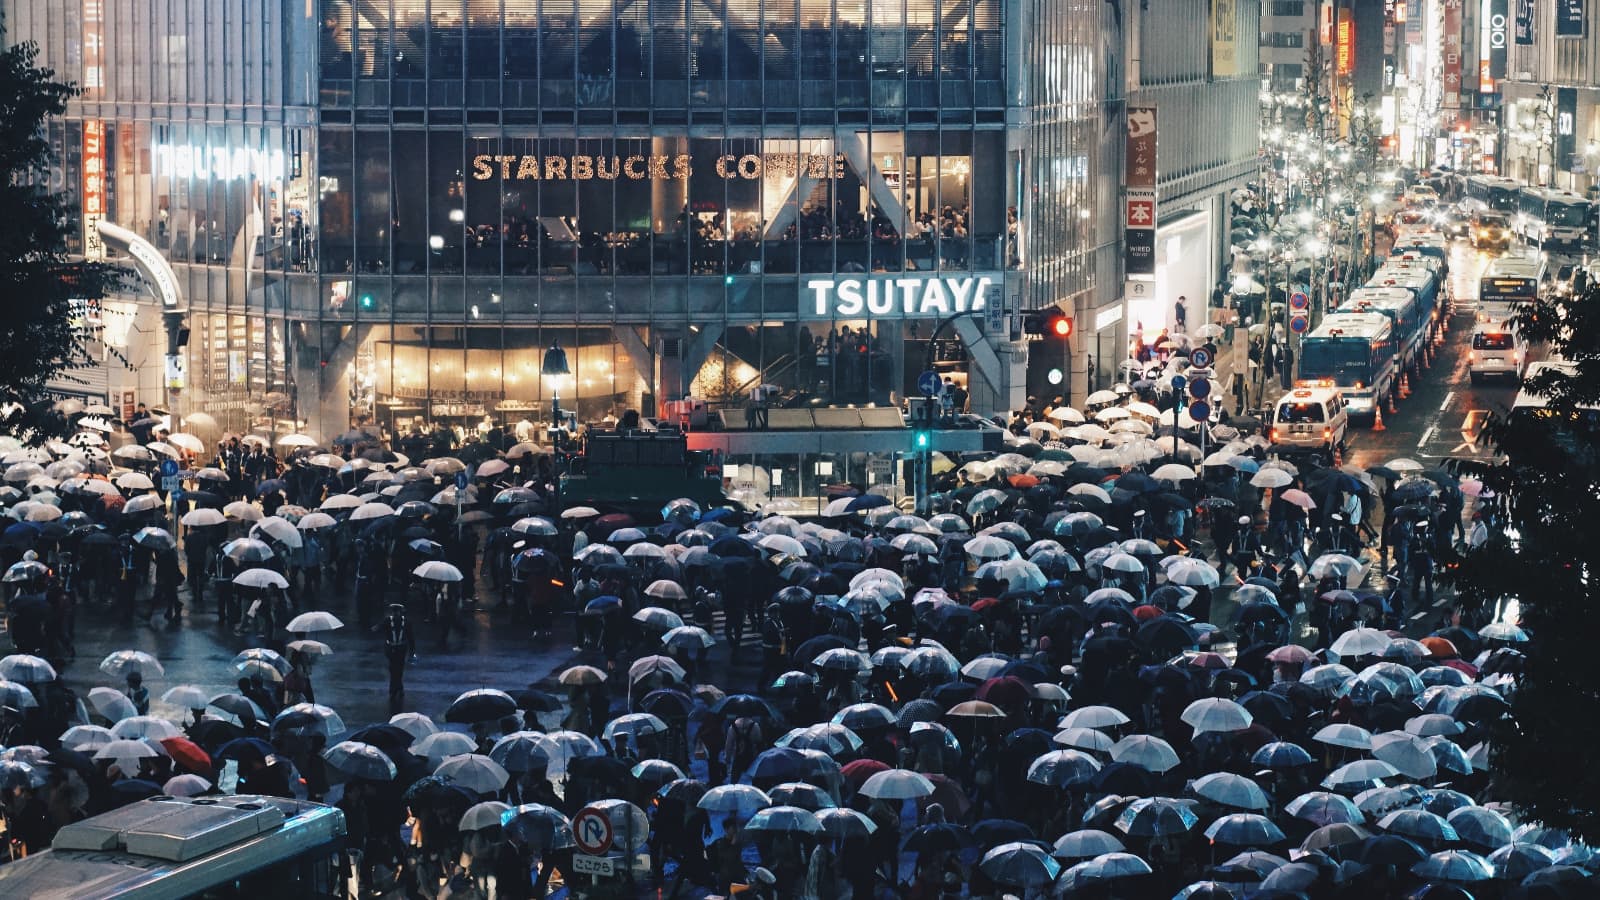 Shibuya Crossing, the busiest intersection in the world, in the rain with iconic transparent Japanese umbrellas.